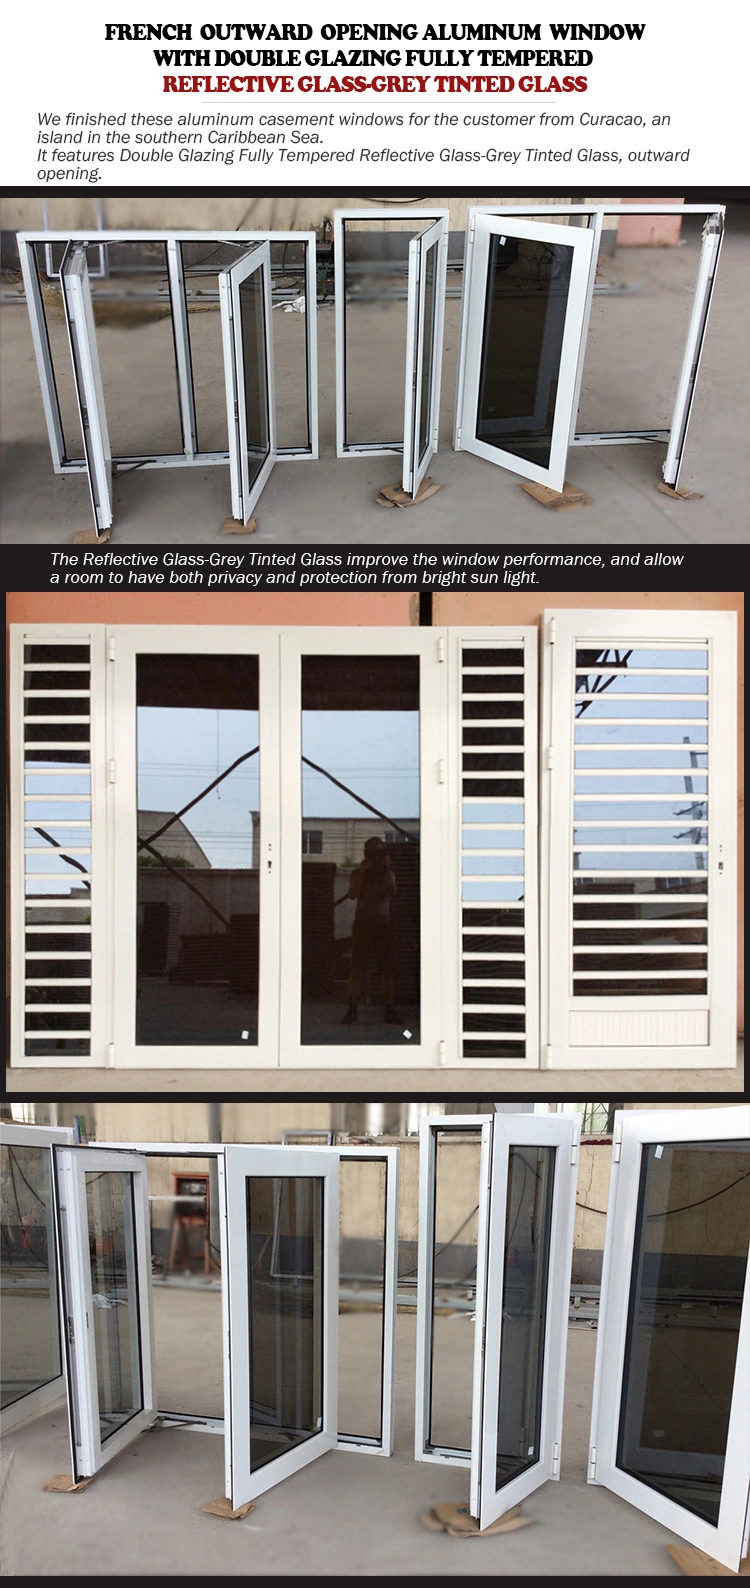 Aluminum French Outward Opening Window with Reflective Glass